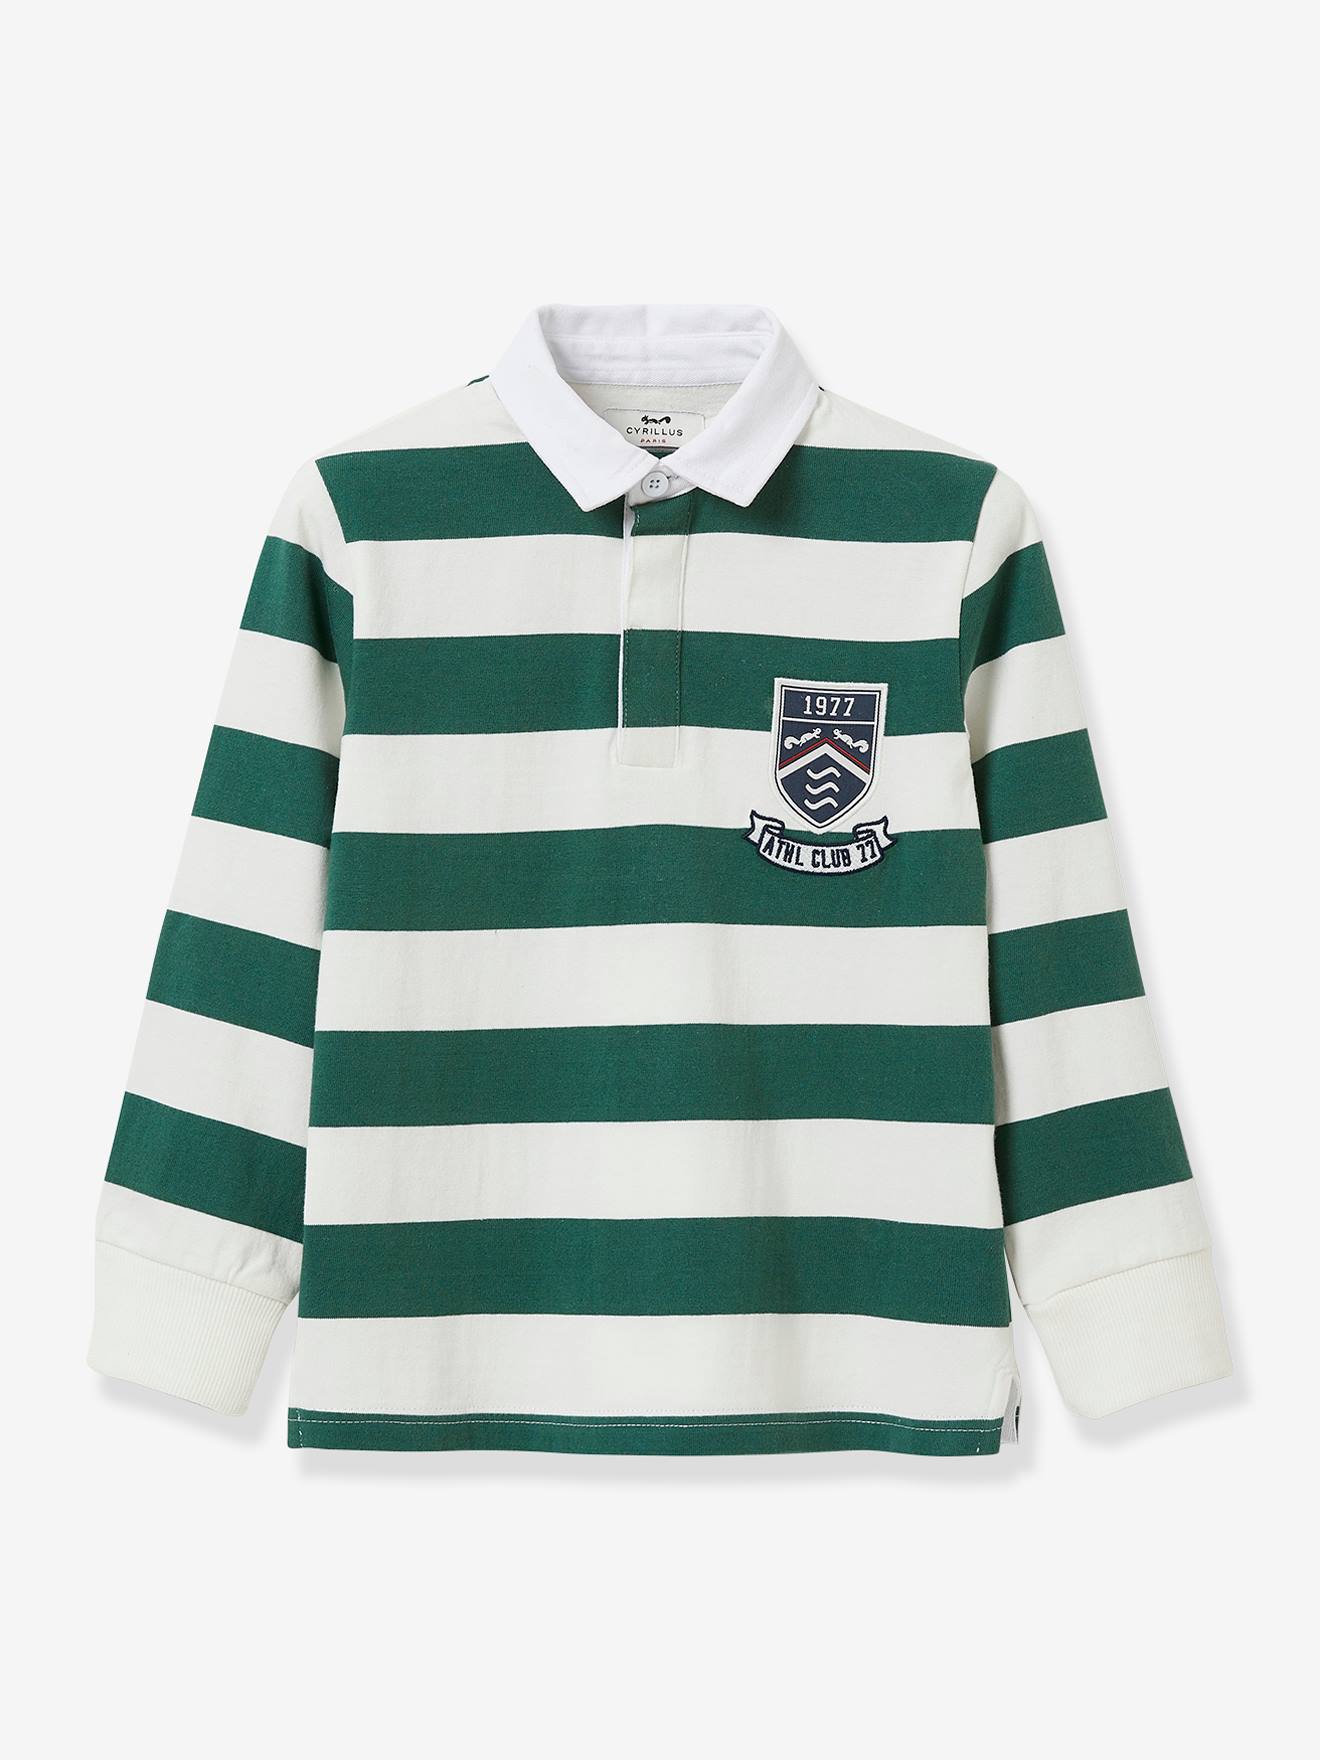 Striped Rugby Shirt in Organic Cotton for Boys, by CYRILLUS - sky blue/white  stripe, Boys